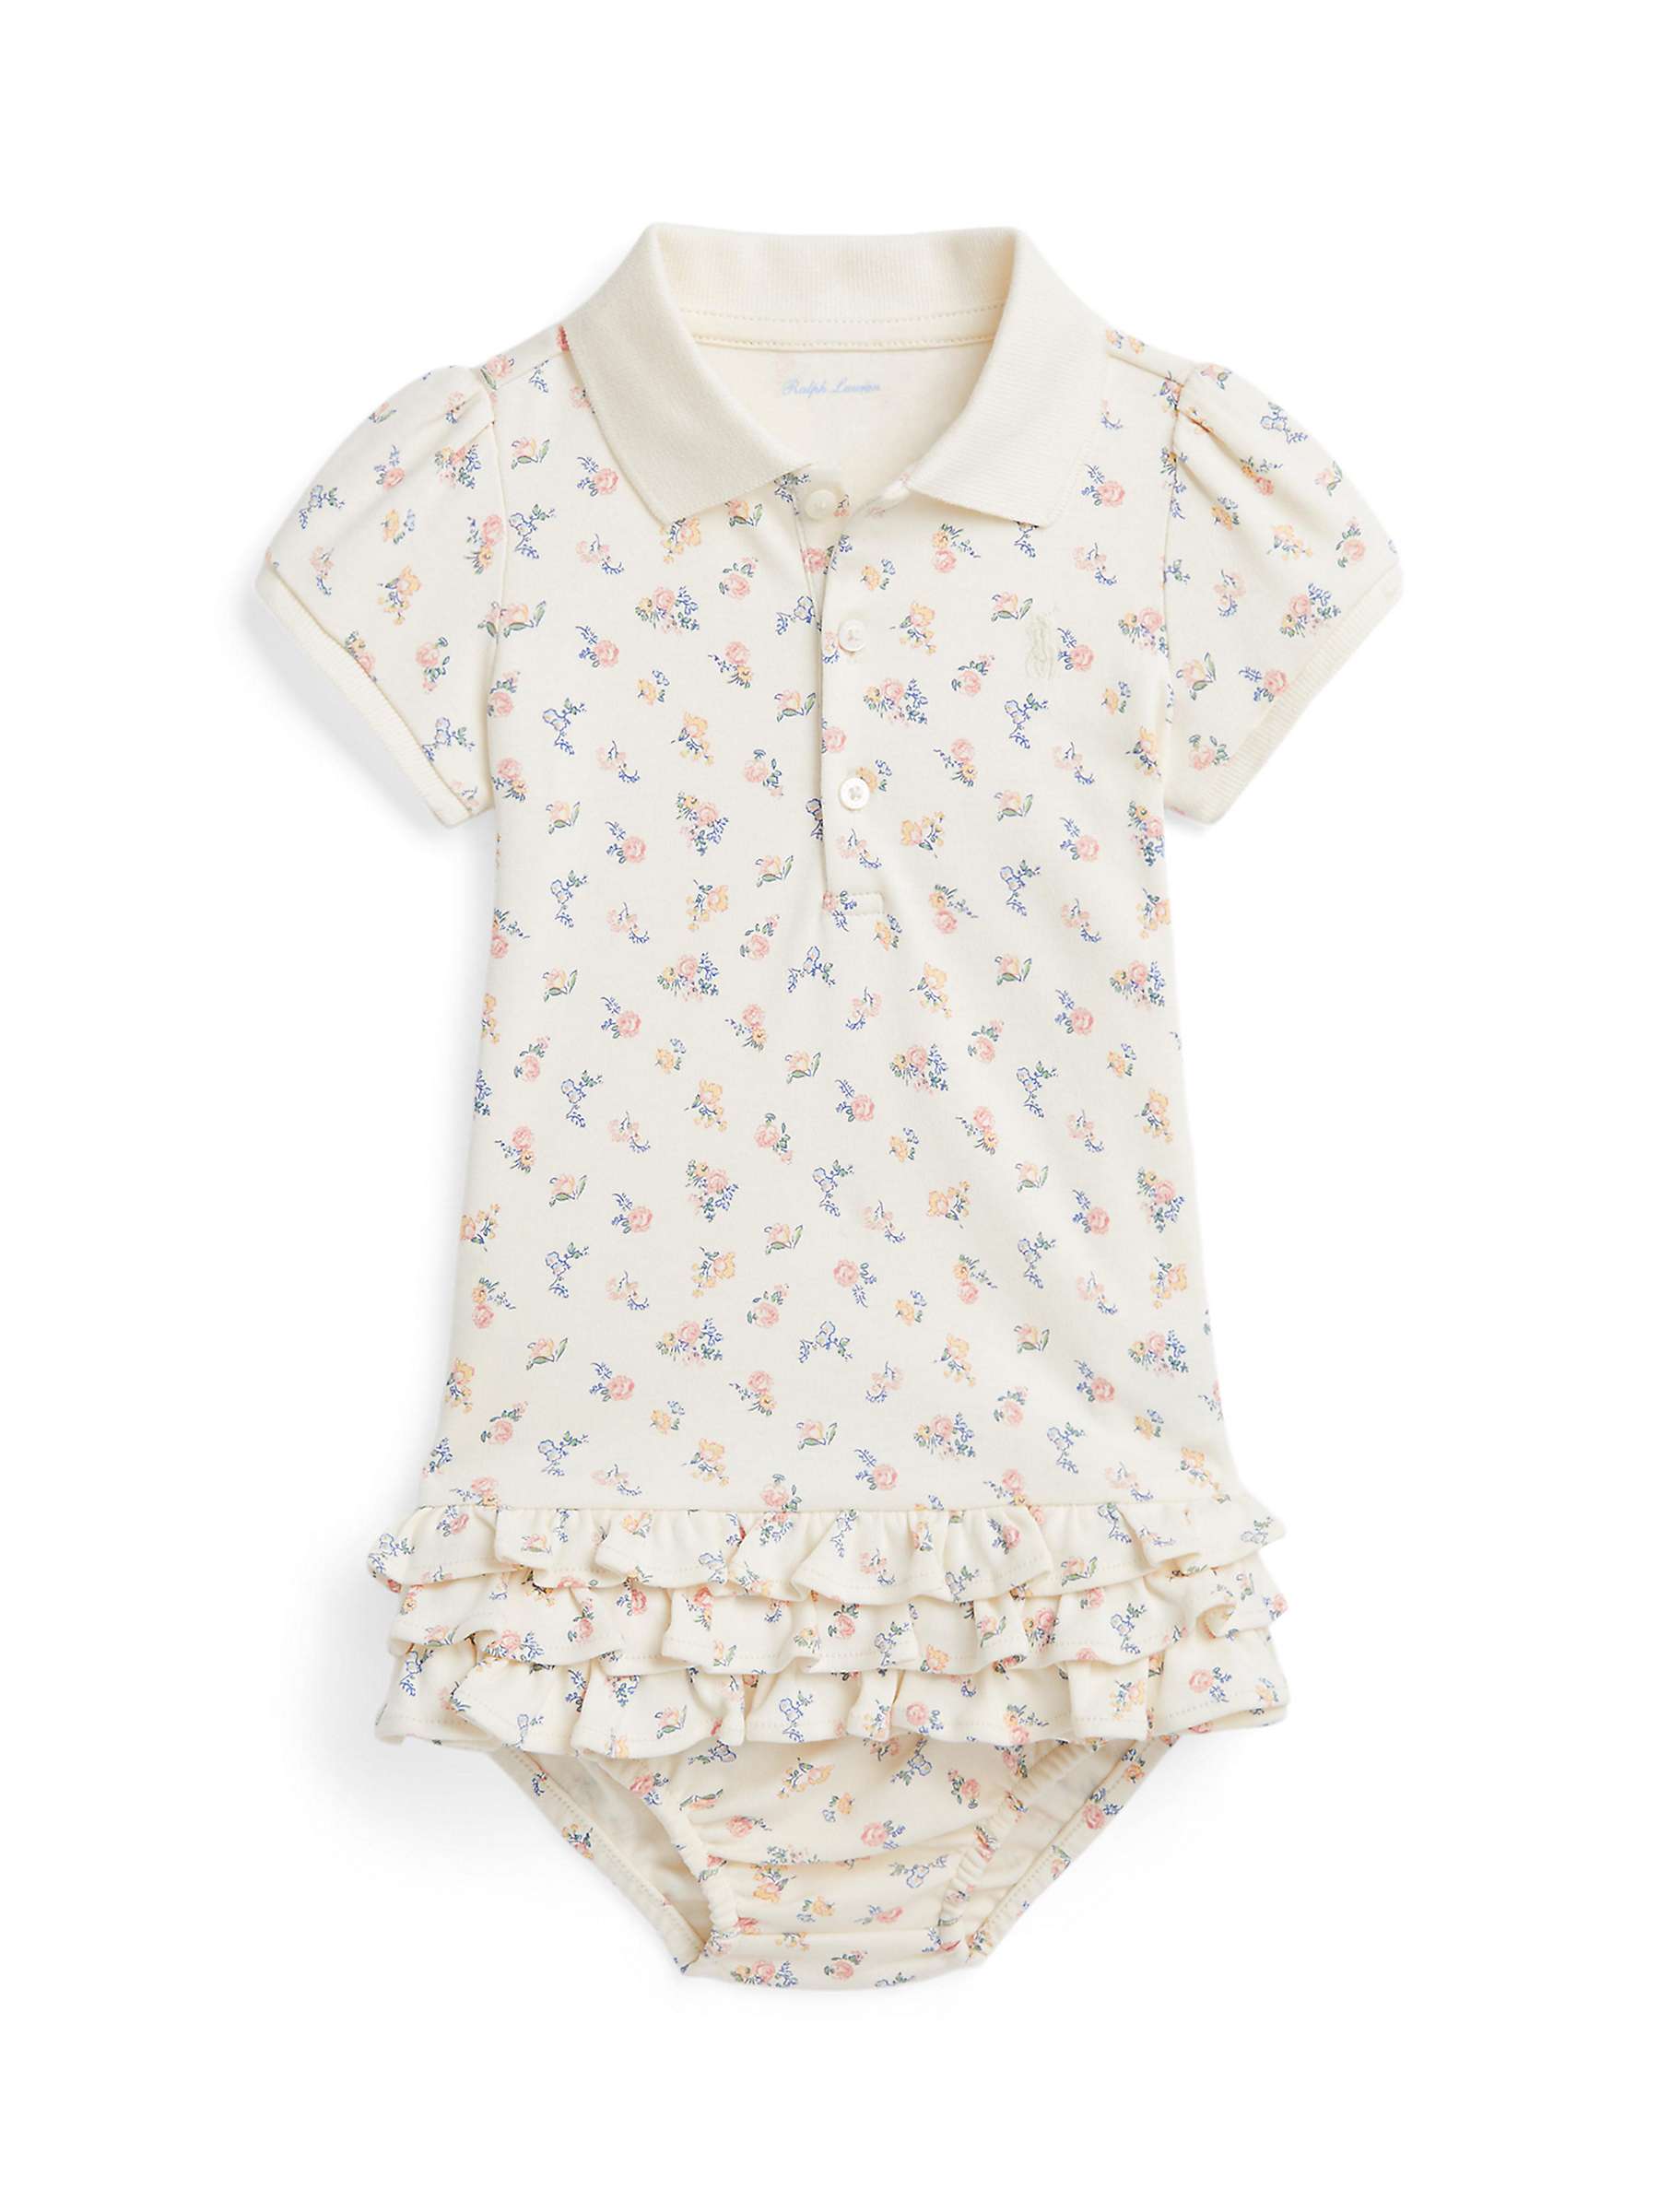 Buy Ralph Lauren Baby Cupcake Print Outfit, White Online at johnlewis.com